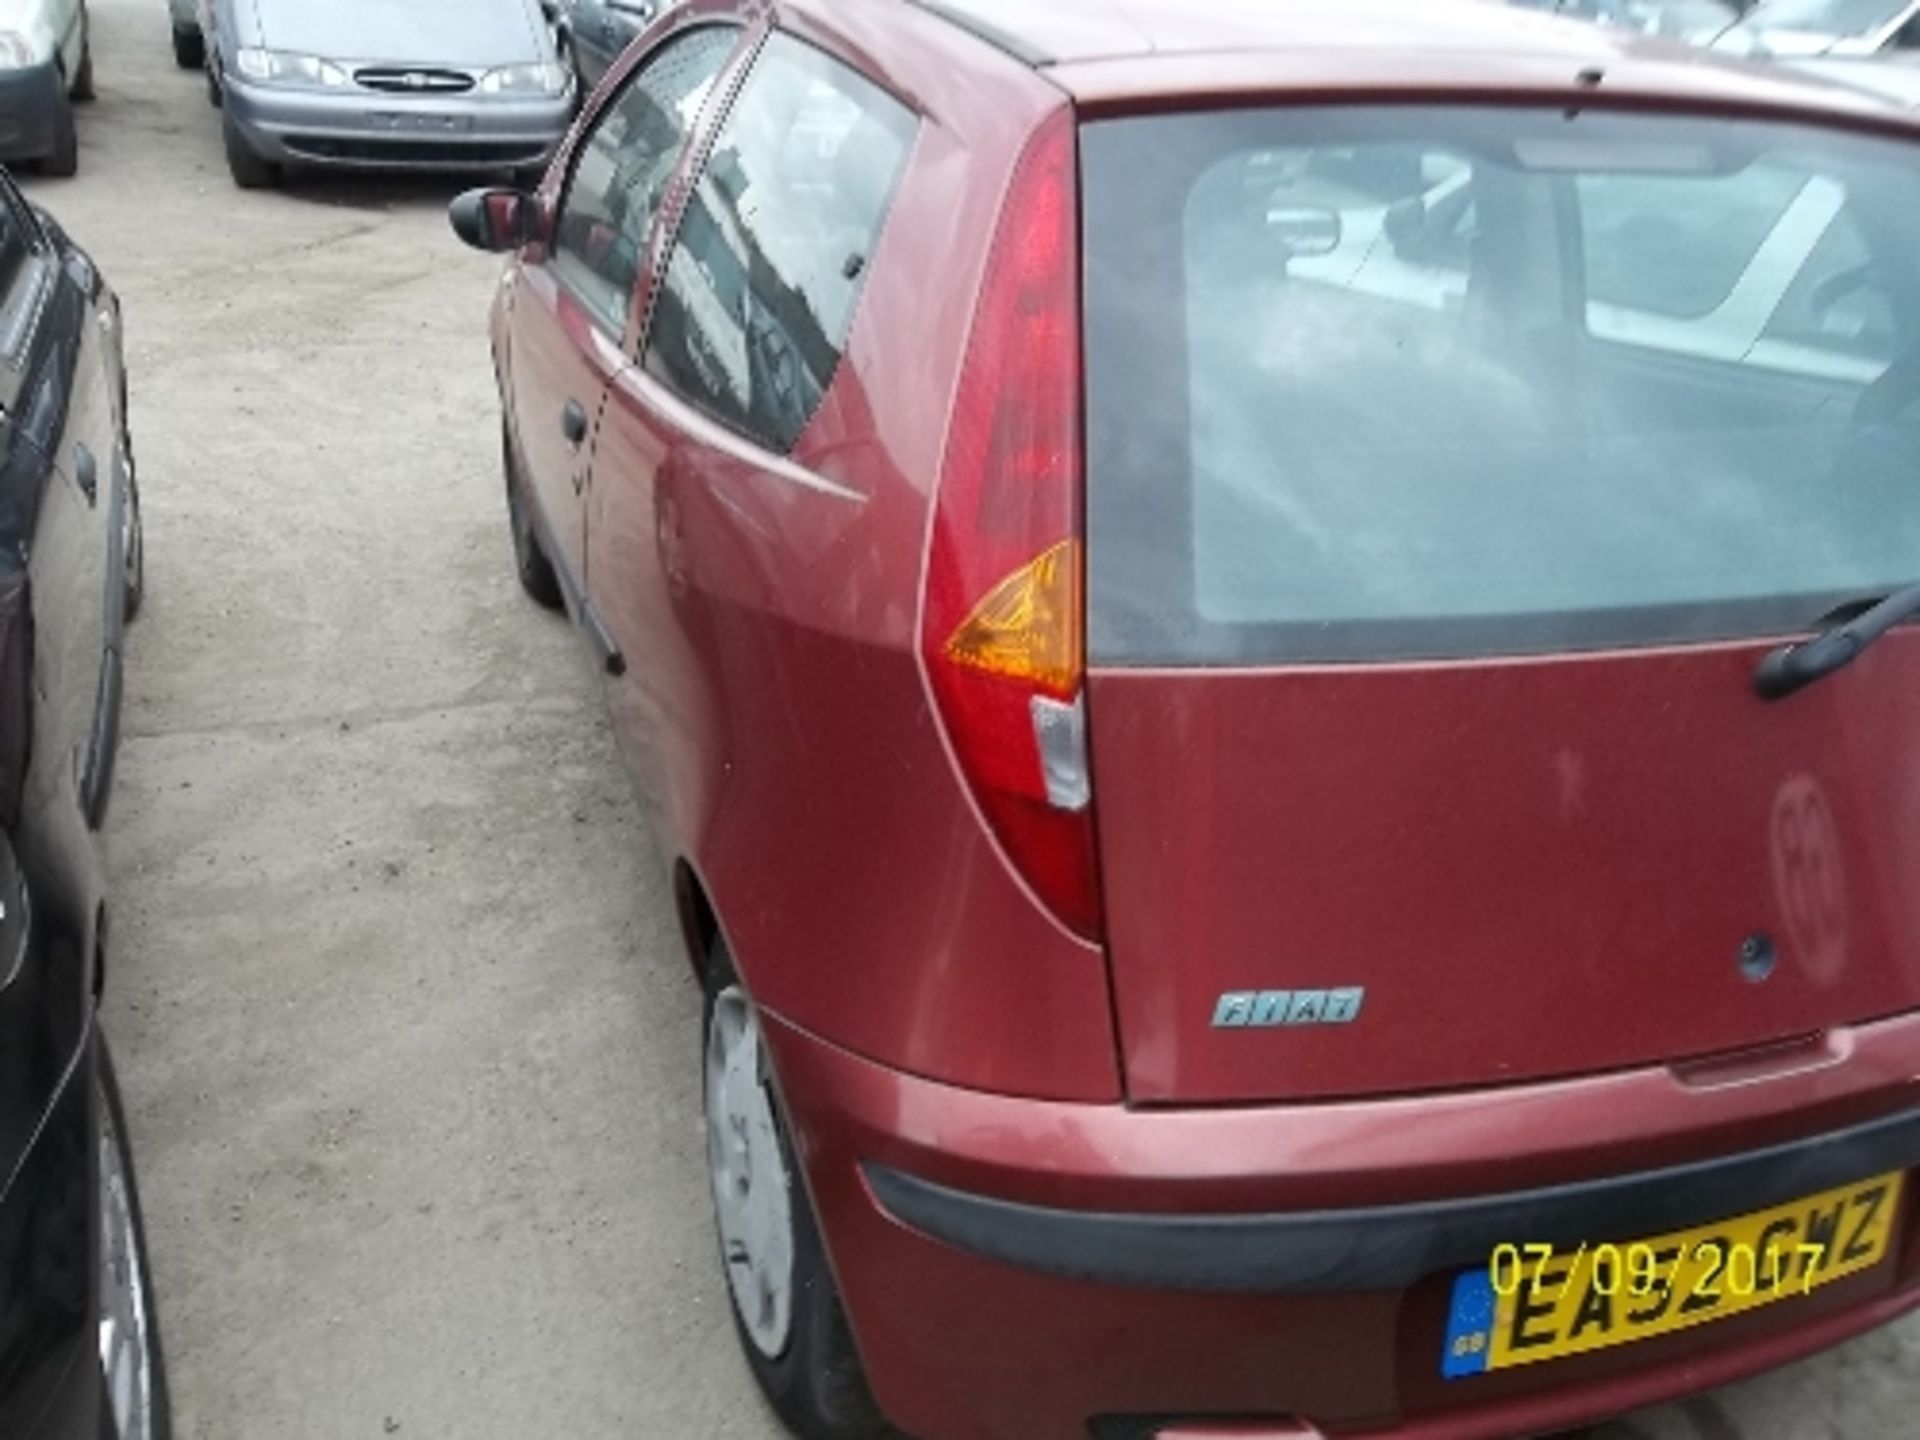 Fiat Punto Active Sport - EA52 GWZ Date of registration: 31.10.2002 1242cc, petrol, manual, red - Image 4 of 4